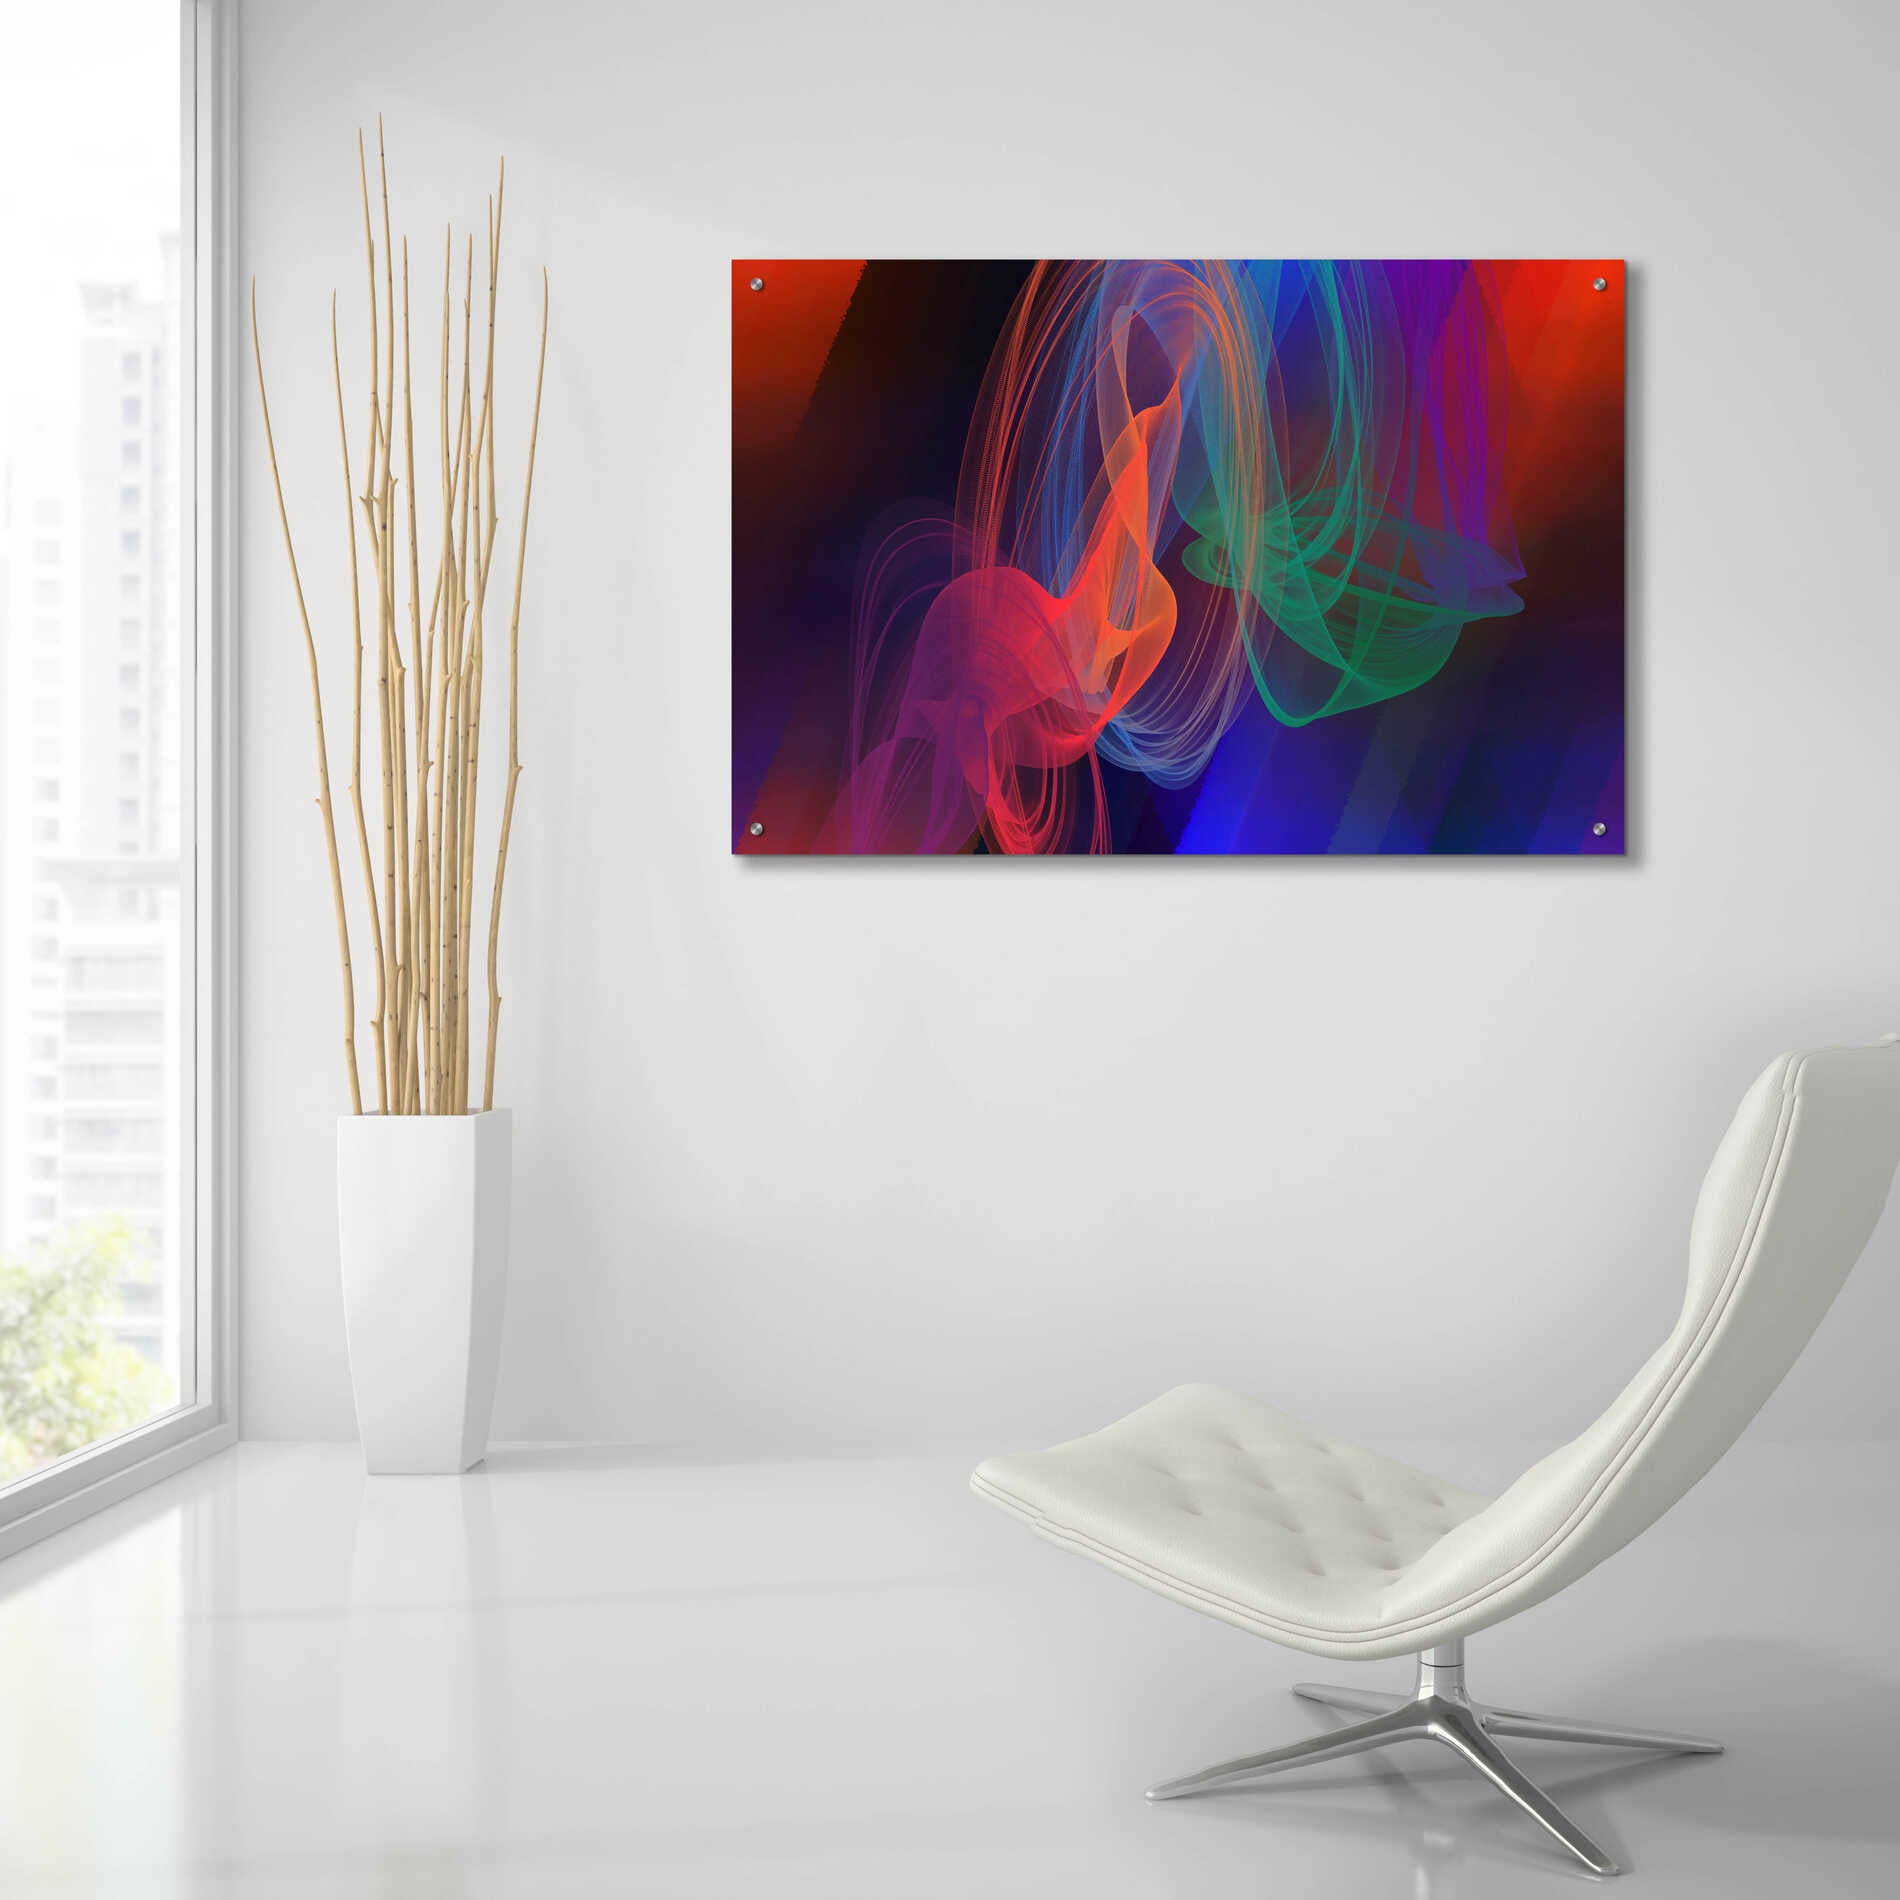 Epic Art 'Inverted Color In The Lines 11' by Irena Orlov Acrylic Glass Wall Art,36x24